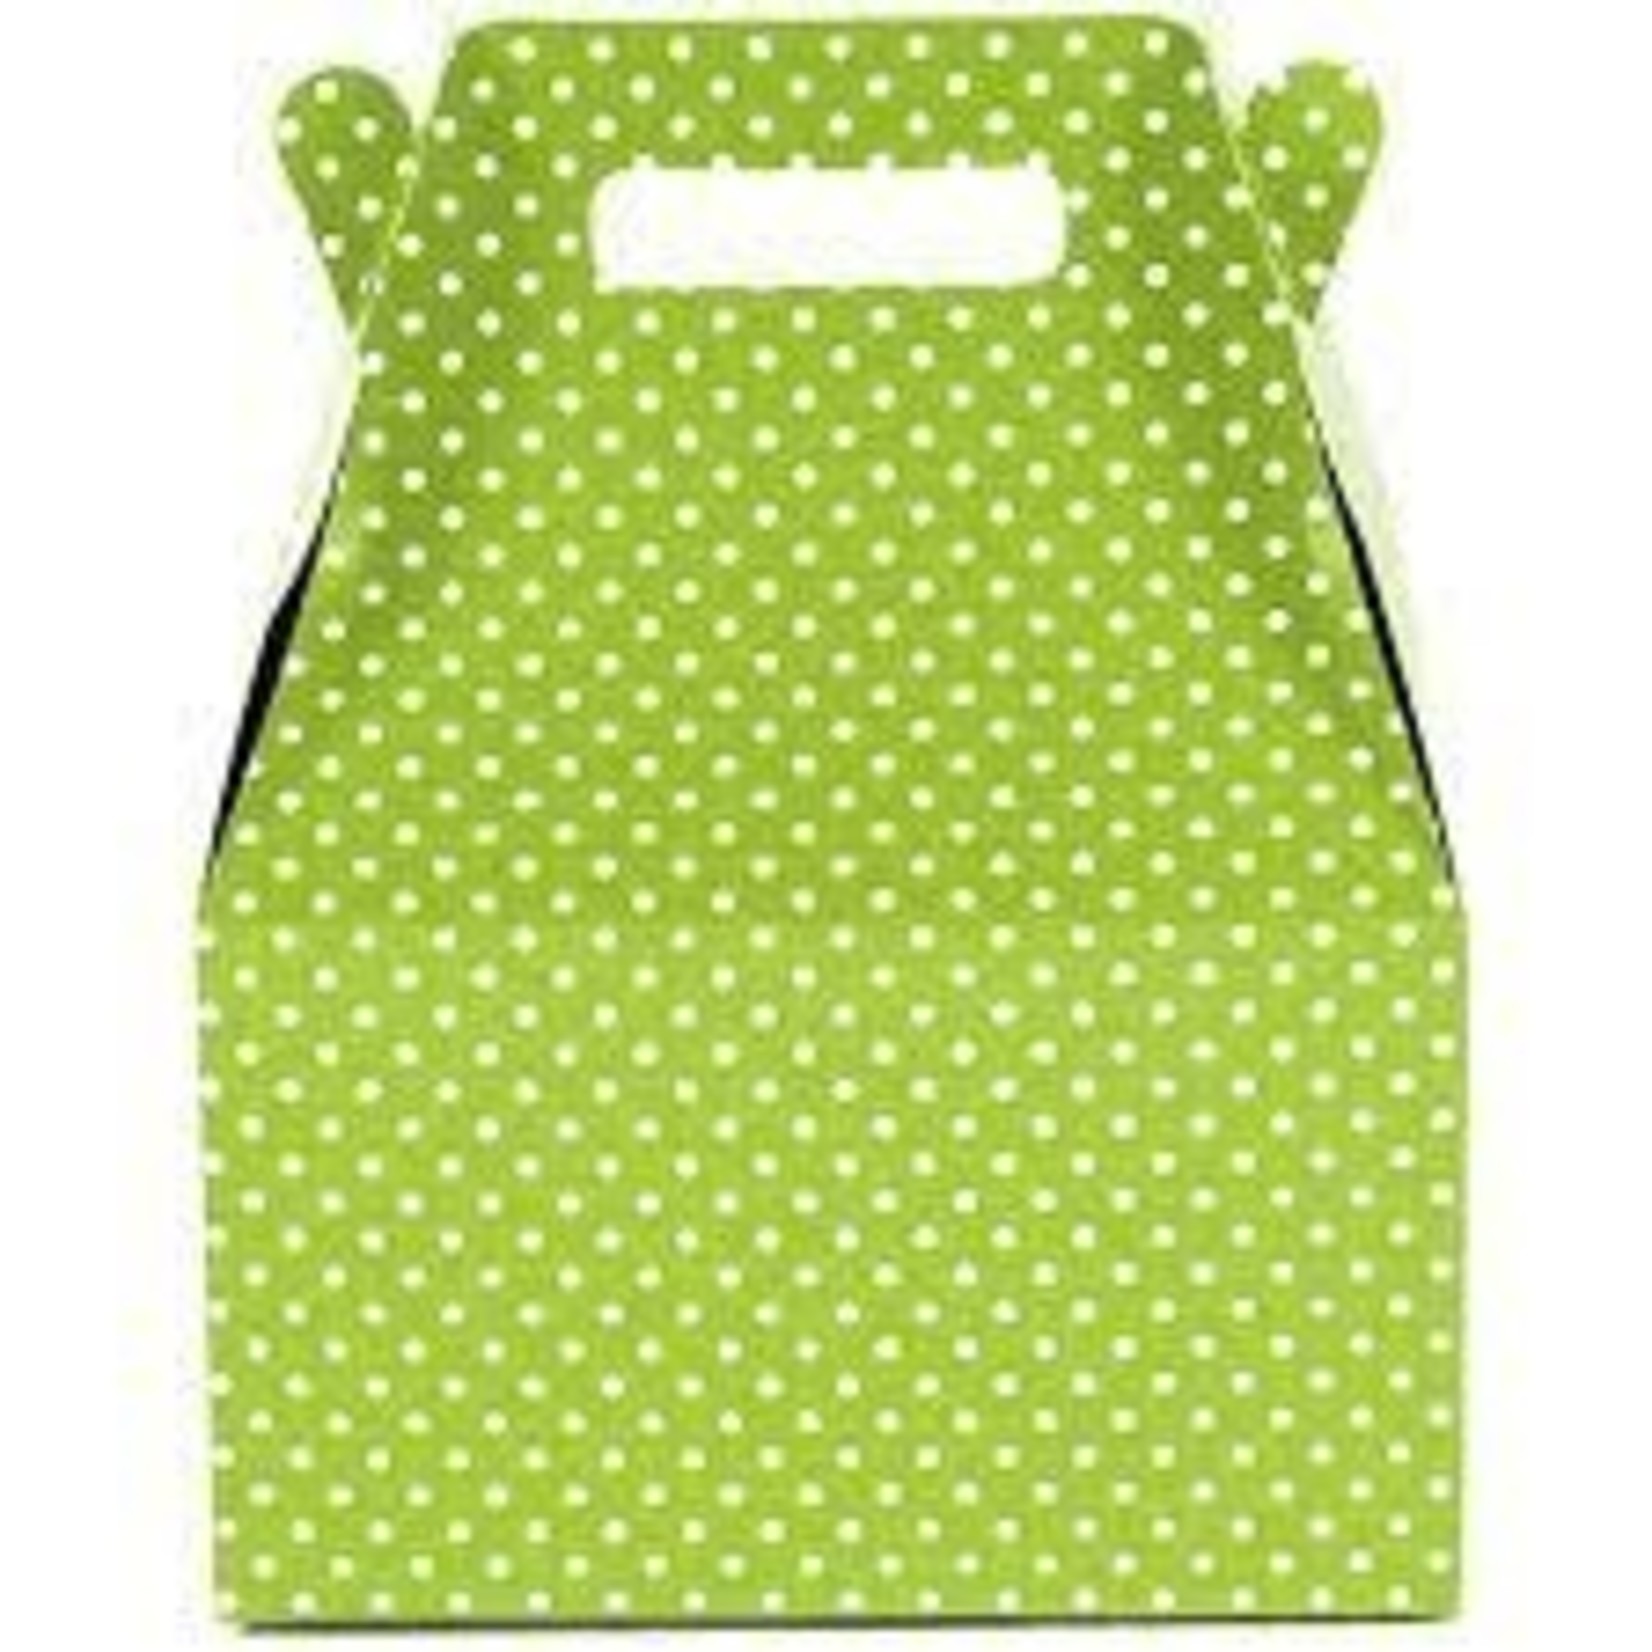 Lime Green with White Polka Dots Treat Box 12ct